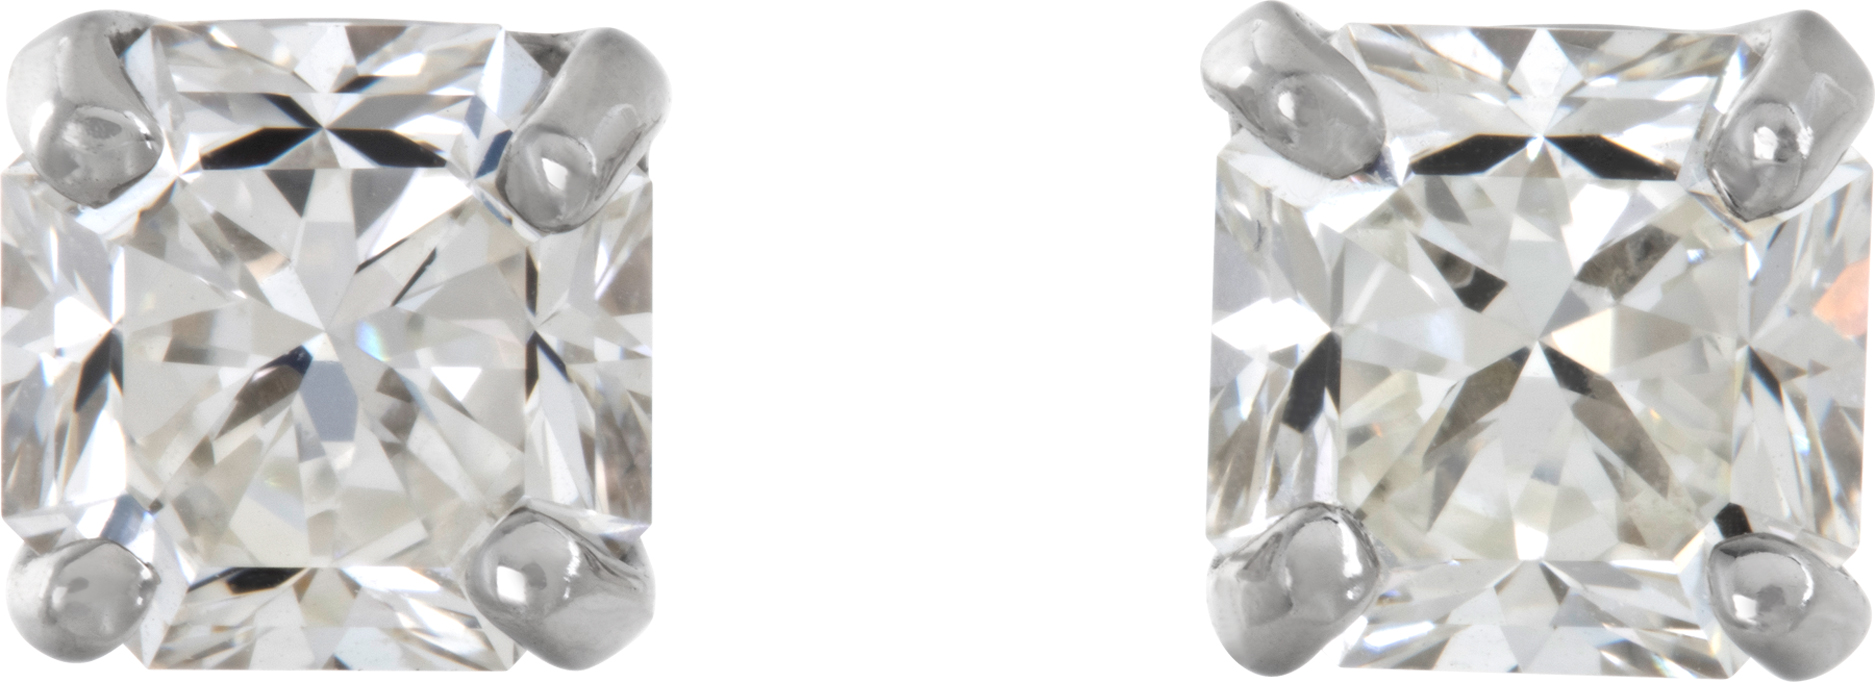 Tiffany & Co. Lucida Cut Studs earrings in platinum with 2.19 cts